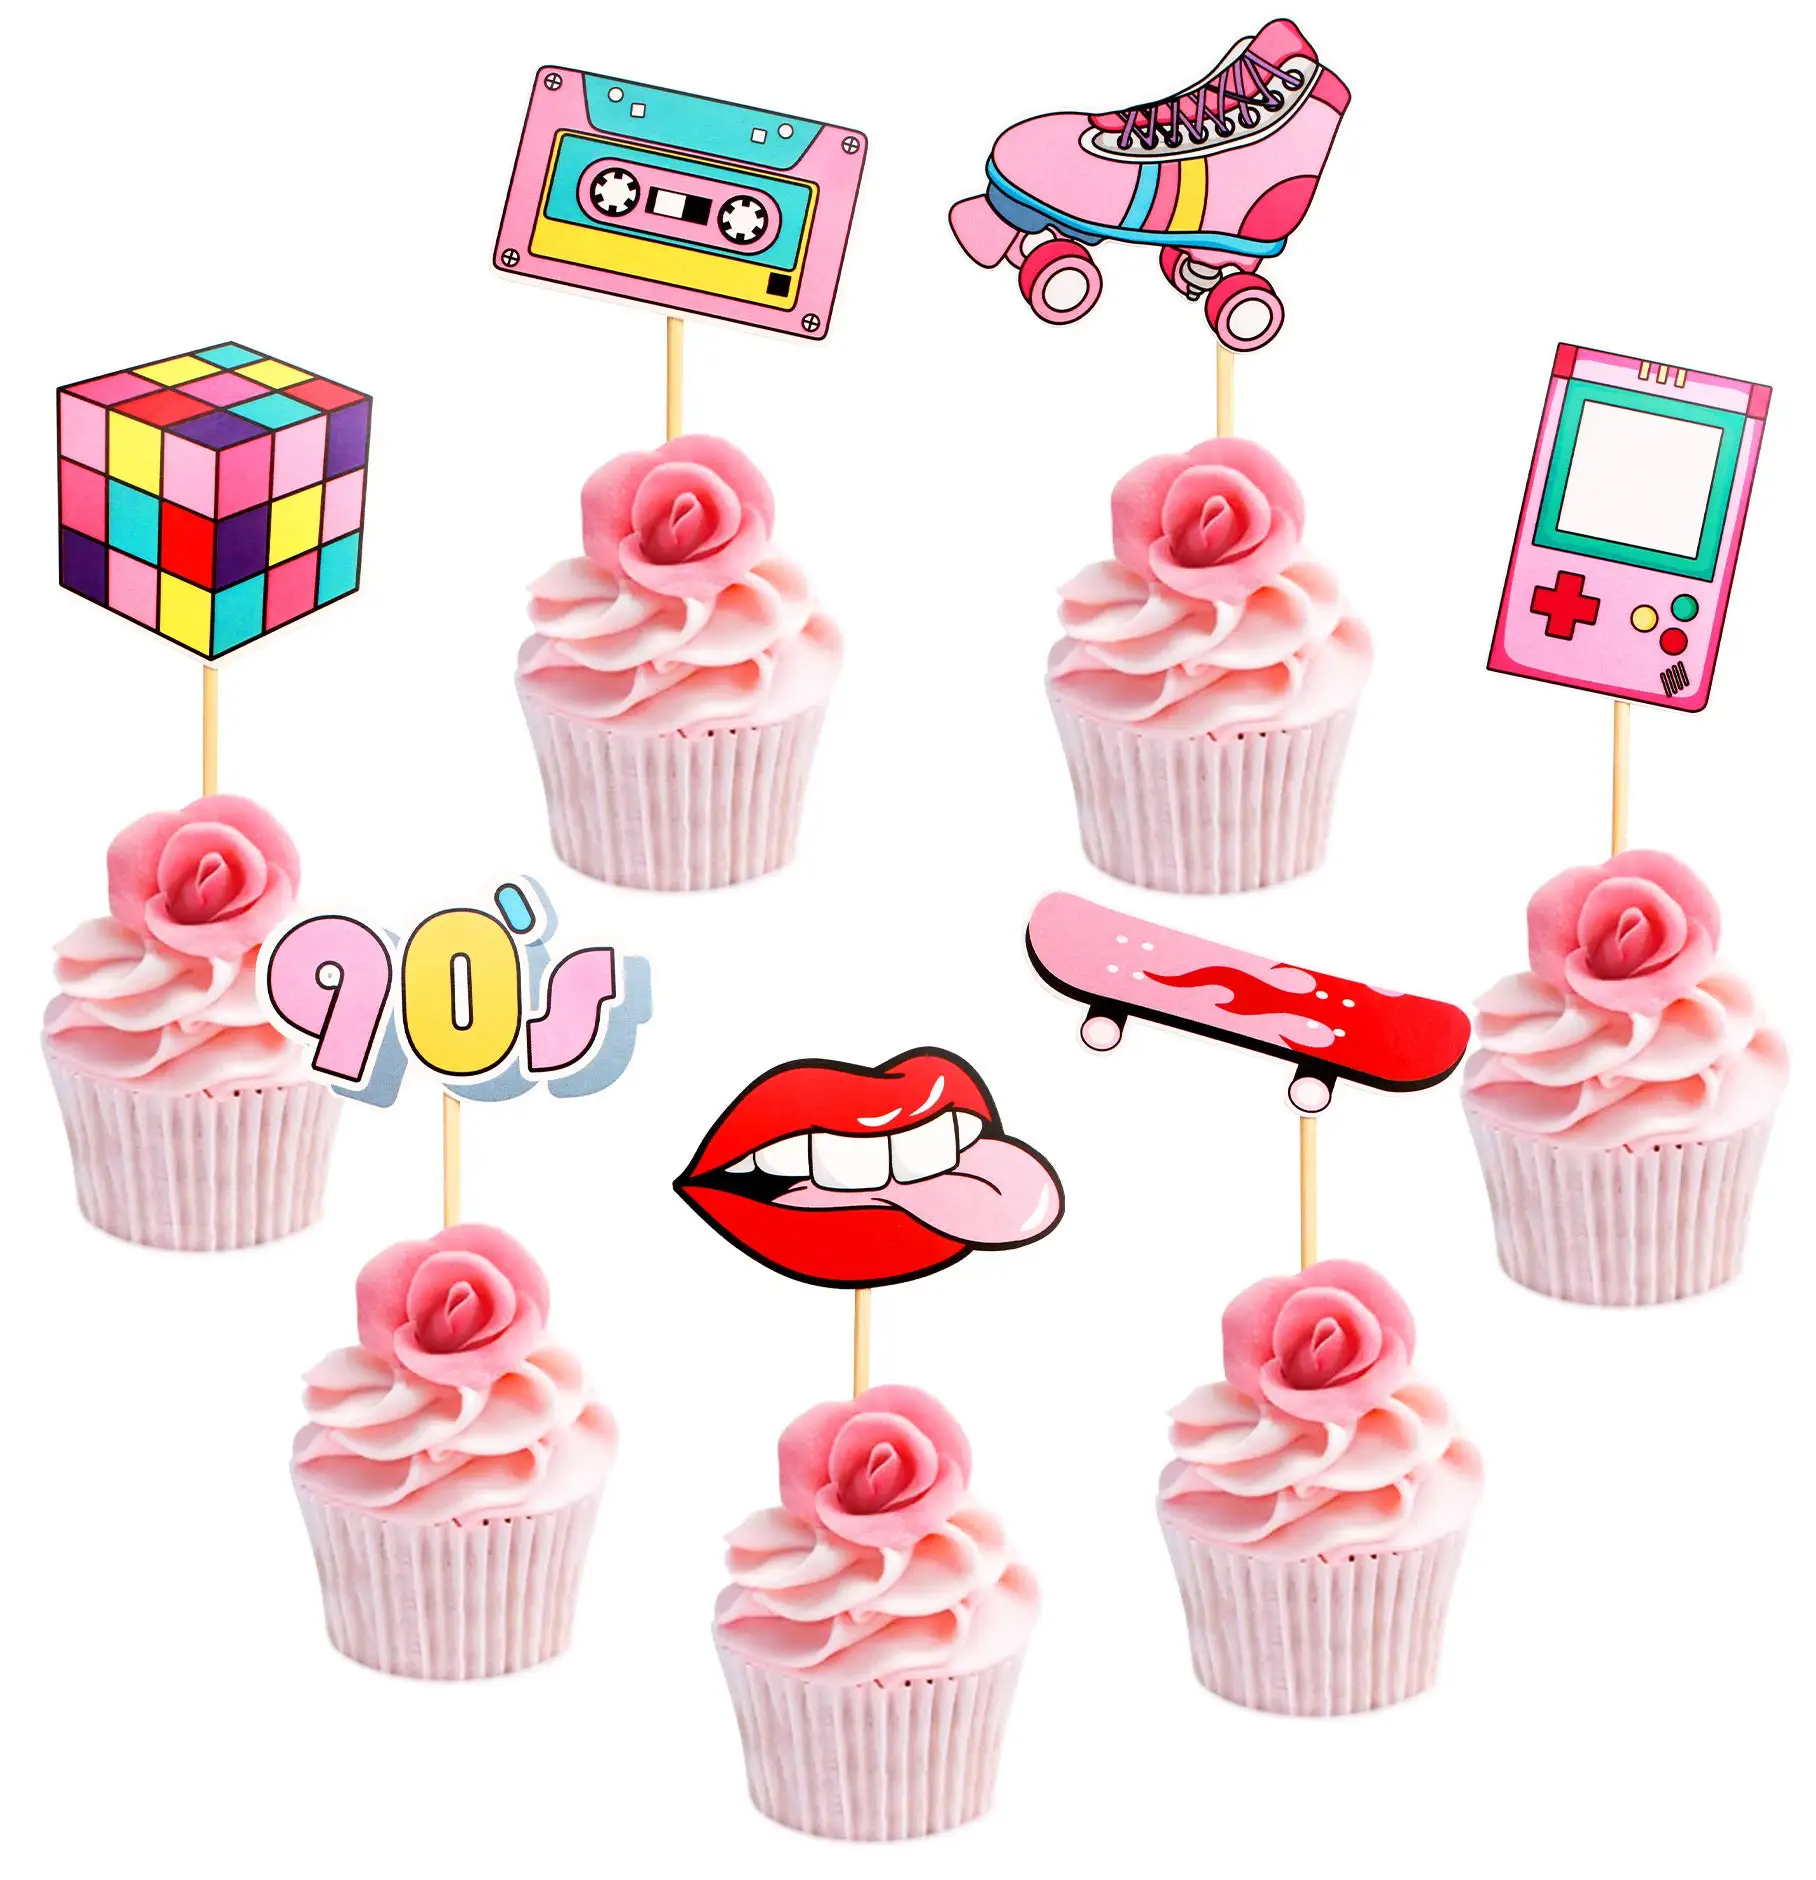 21Pcs 80s 90s Themed Cupcake Toppers Dessert Cupcake Toppers Birthday Supplies Throwback Party Favors Decorations make up theme cake toppers with sticks baby shower supplies birthday party kids girls favors cosmetic cupcake decorations 24pcs